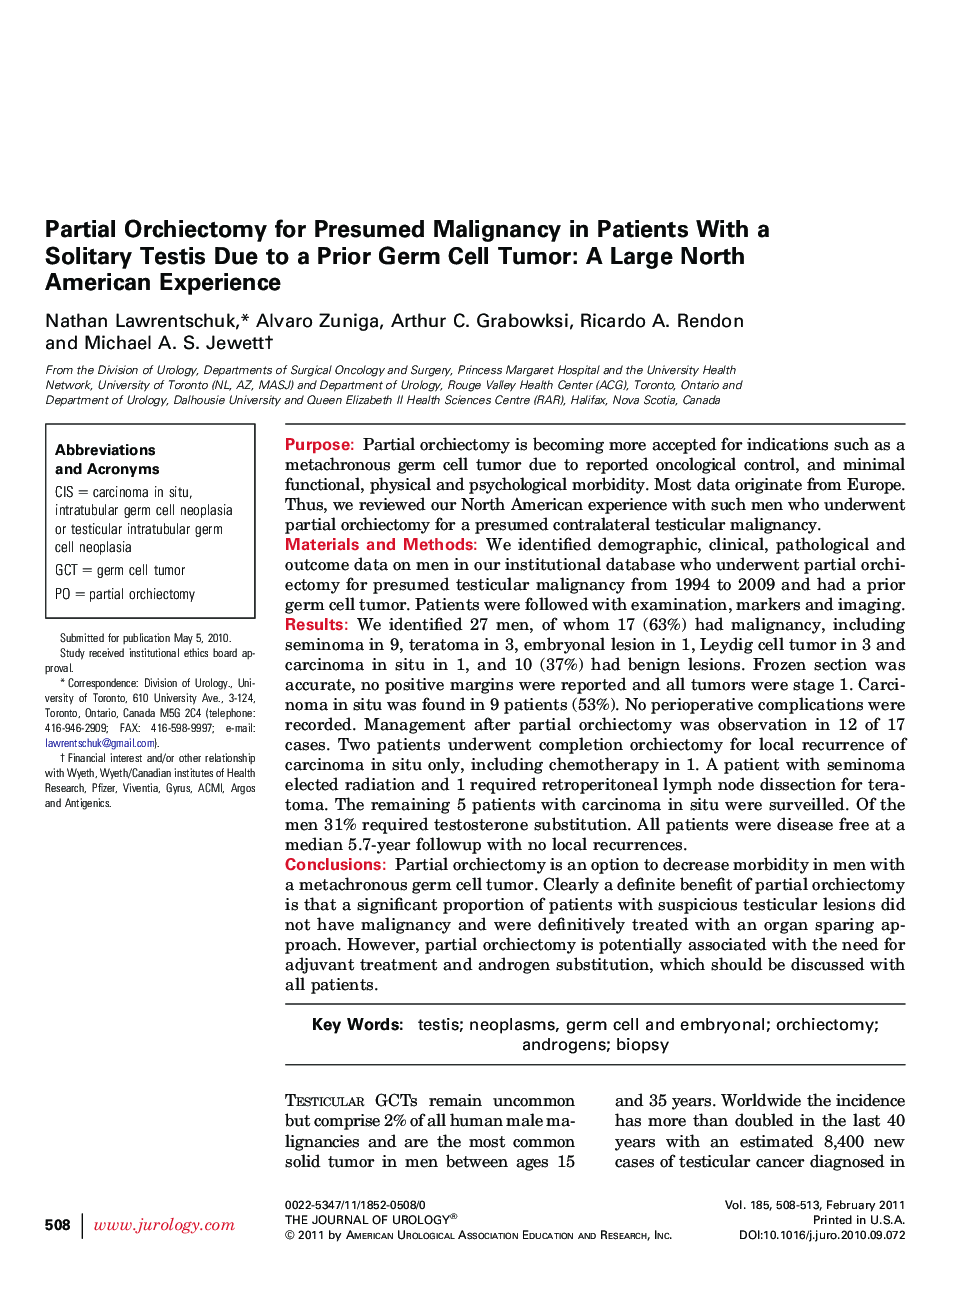 Partial Orchiectomy for Presumed Malignancy in Patients With a Solitary Testis Due to a Prior Germ Cell Tumor: A Large North American Experience 